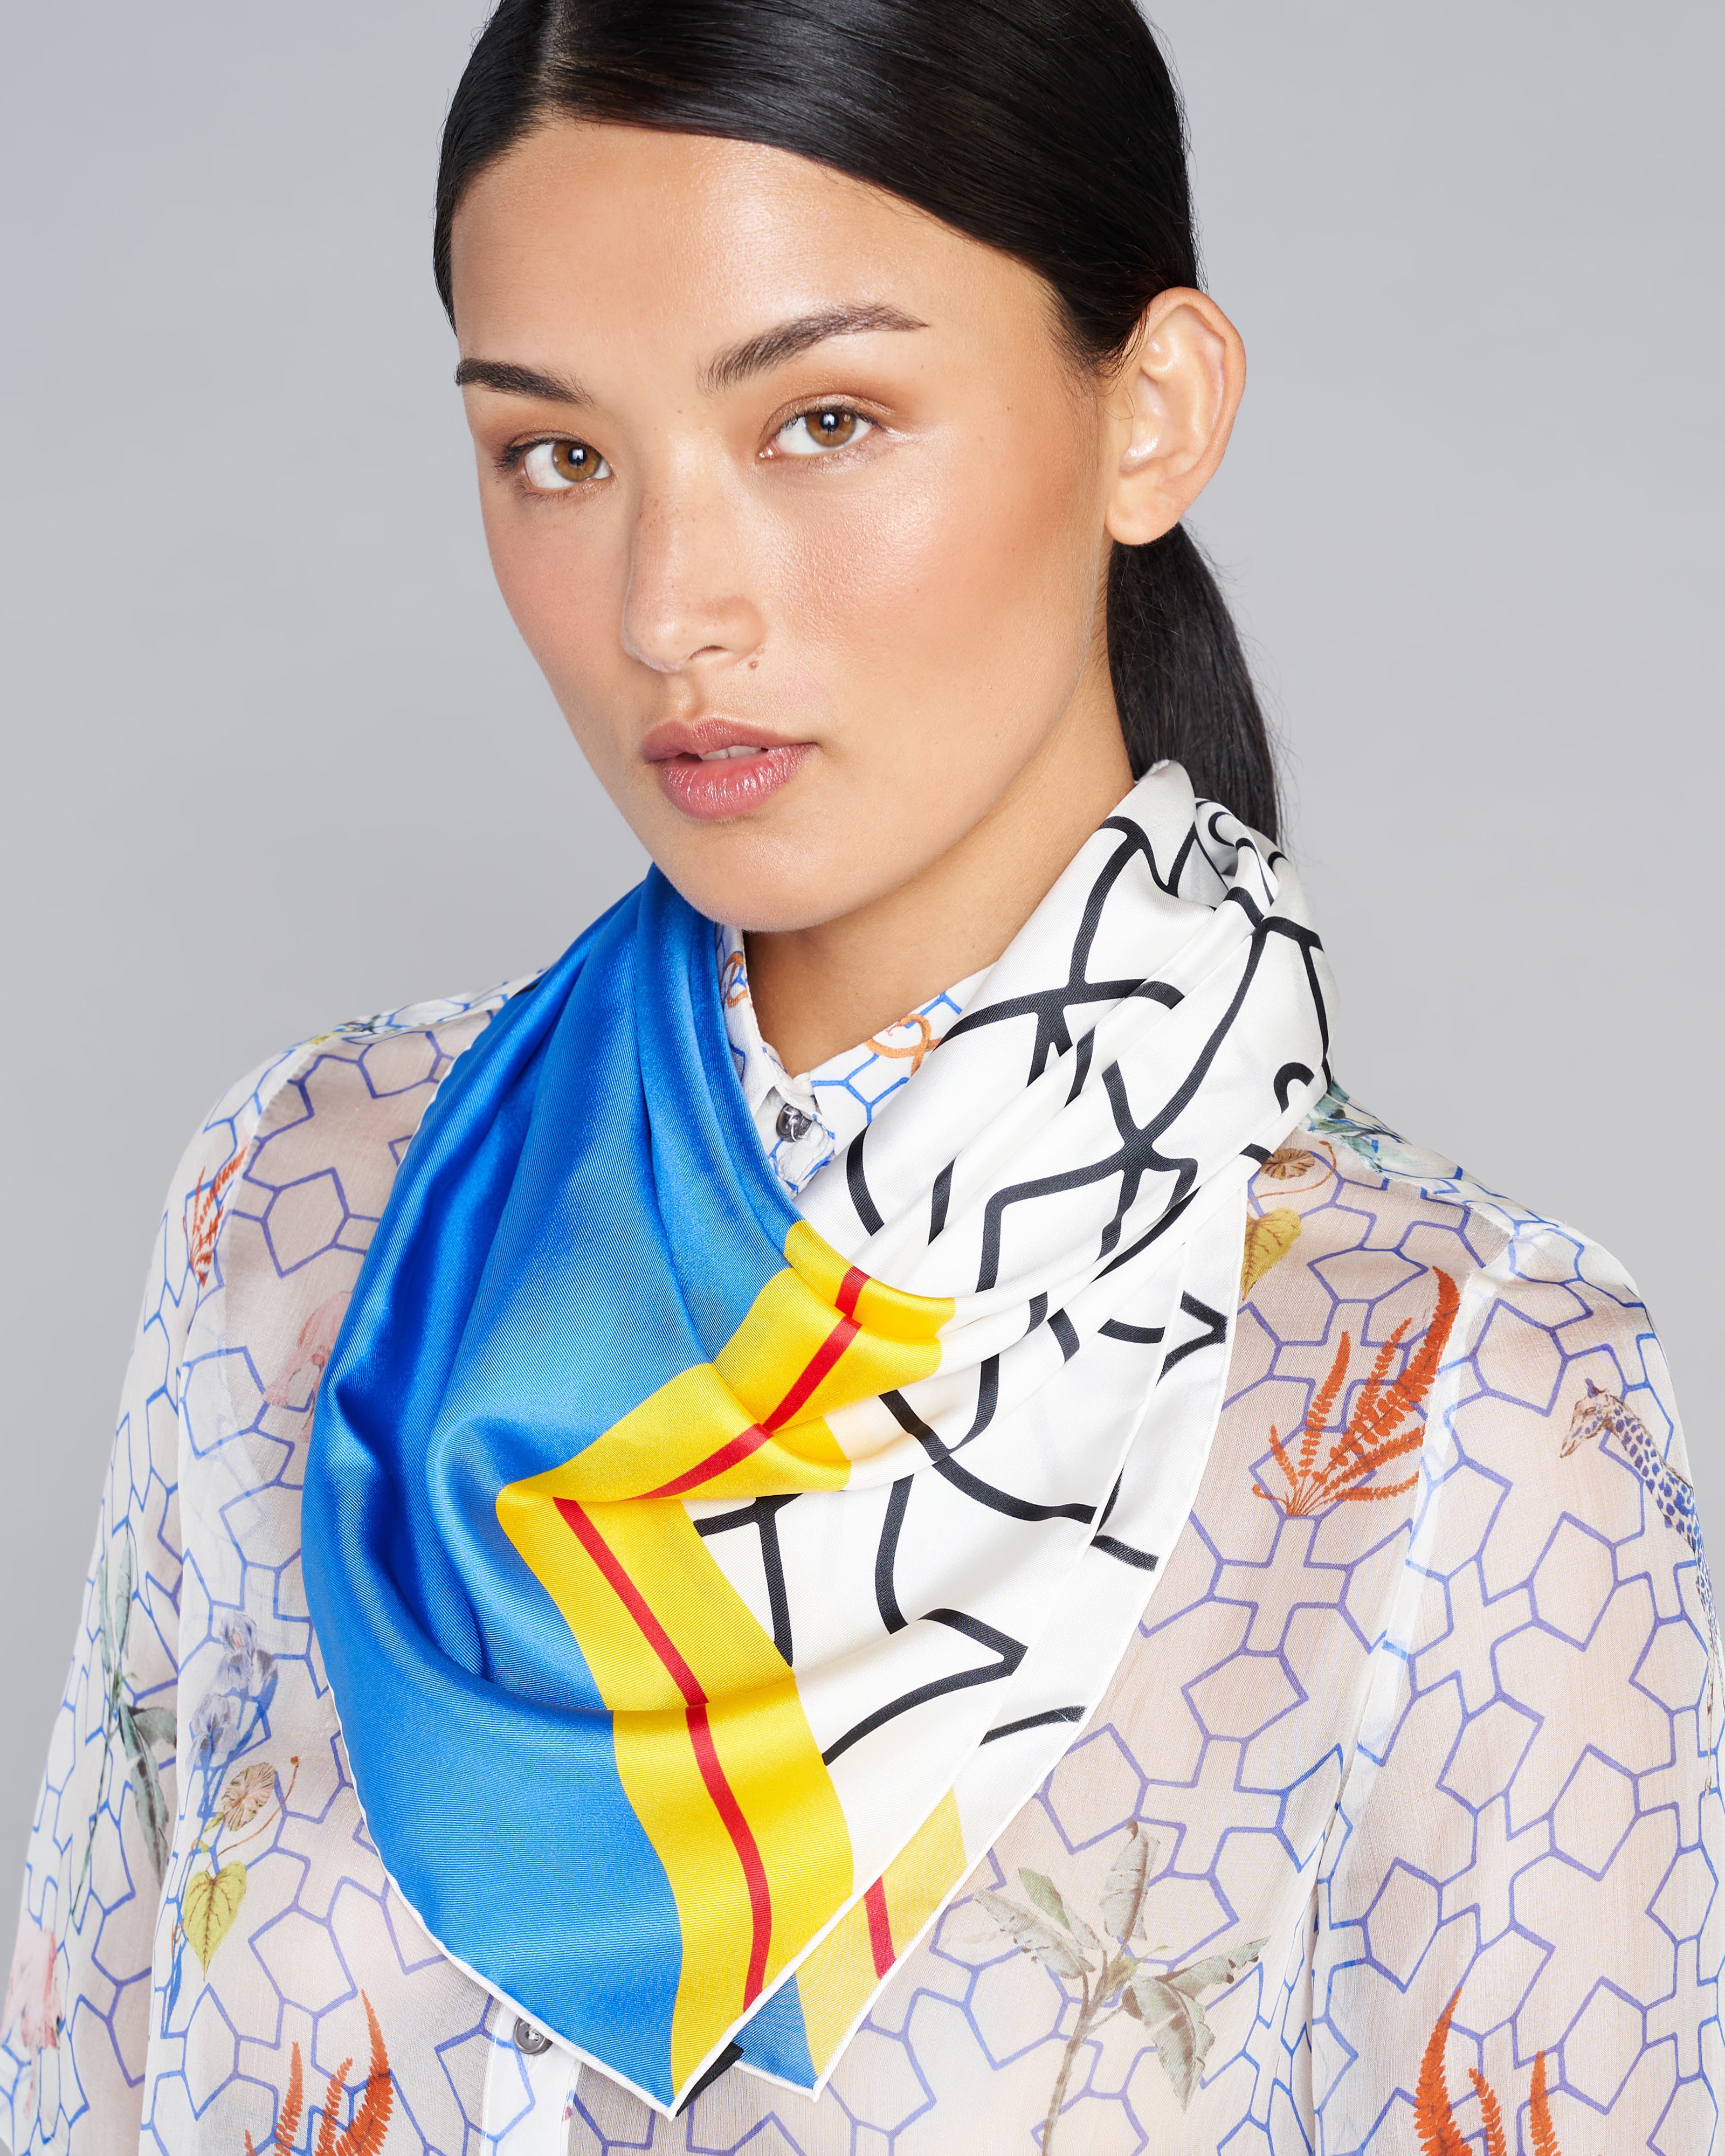 6 Classic Ways to Tie an Hermes Silk Scarf - Shades of Pinck